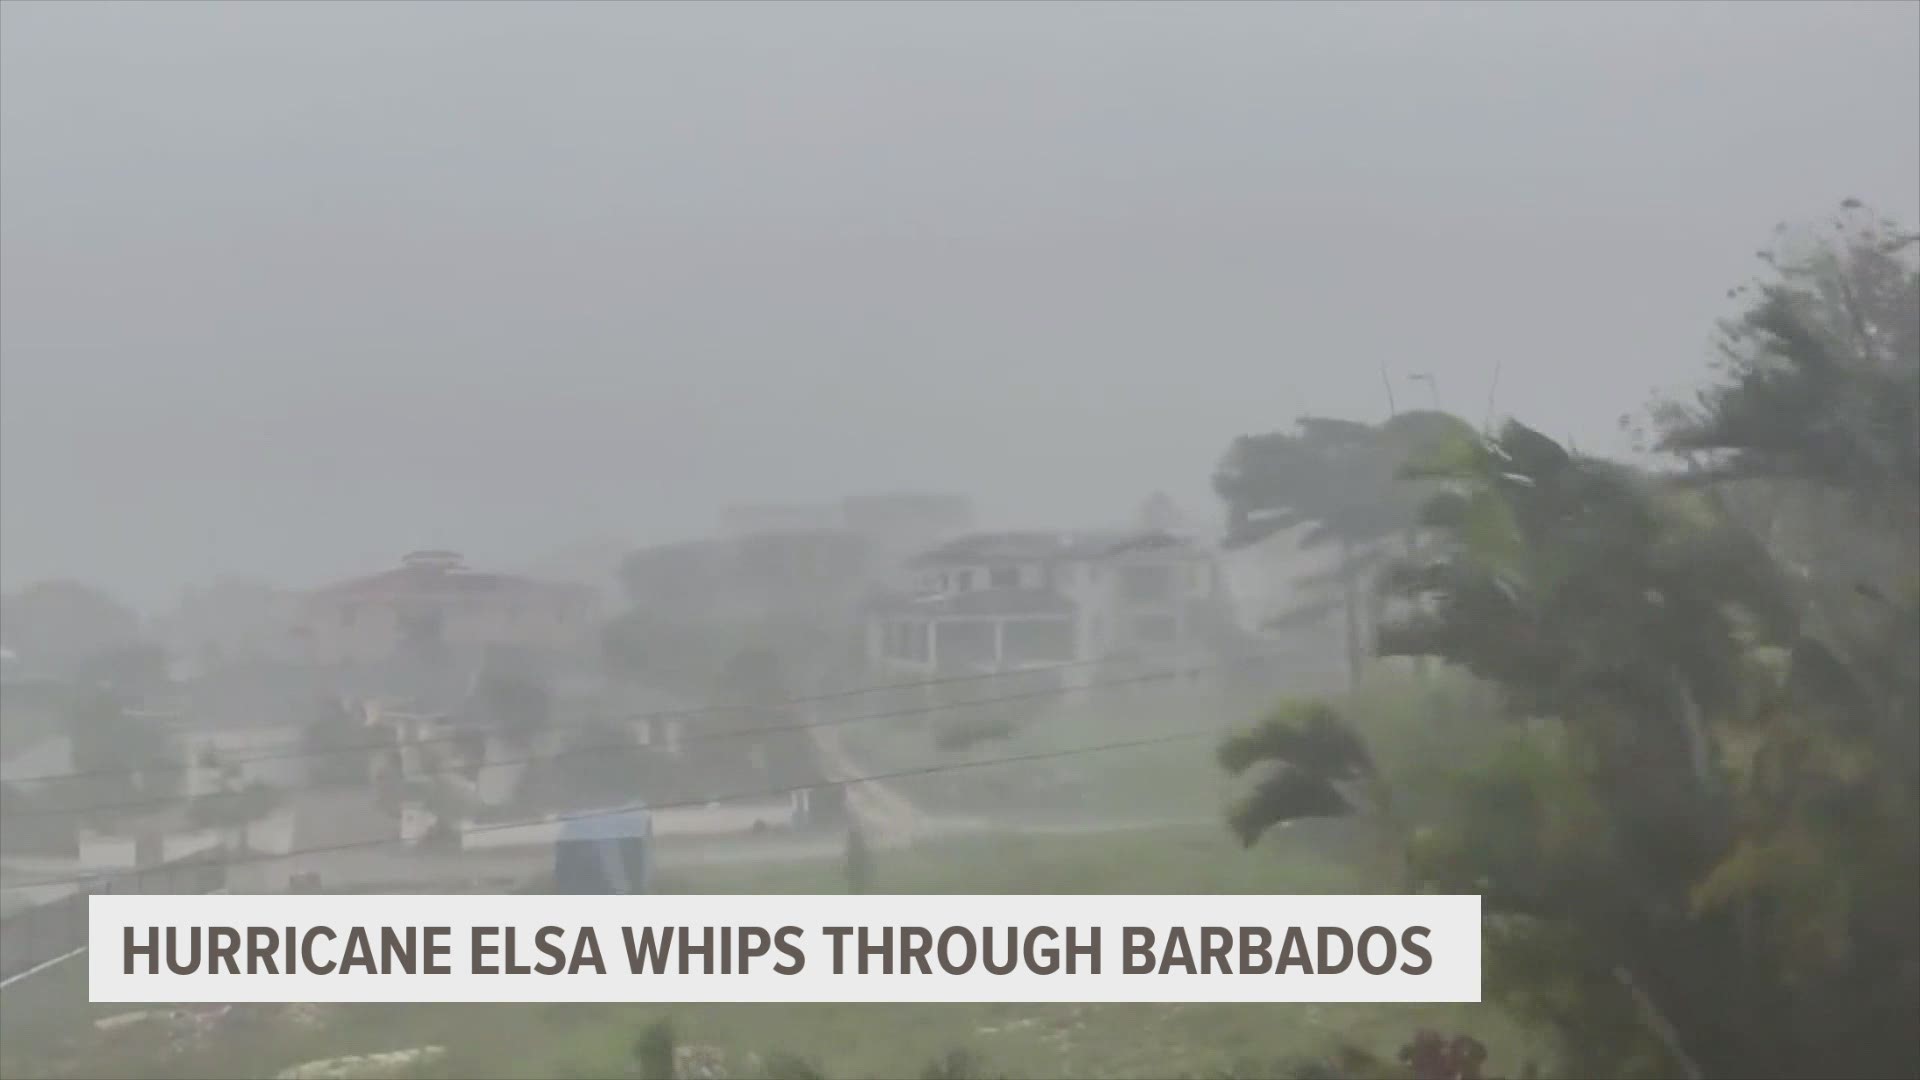 The Category 1 storm unleashed heavy rains and winds on Barbados, St. Vincent and the Grenadines, which are struggling to recover from recent volcanic  eruptions.